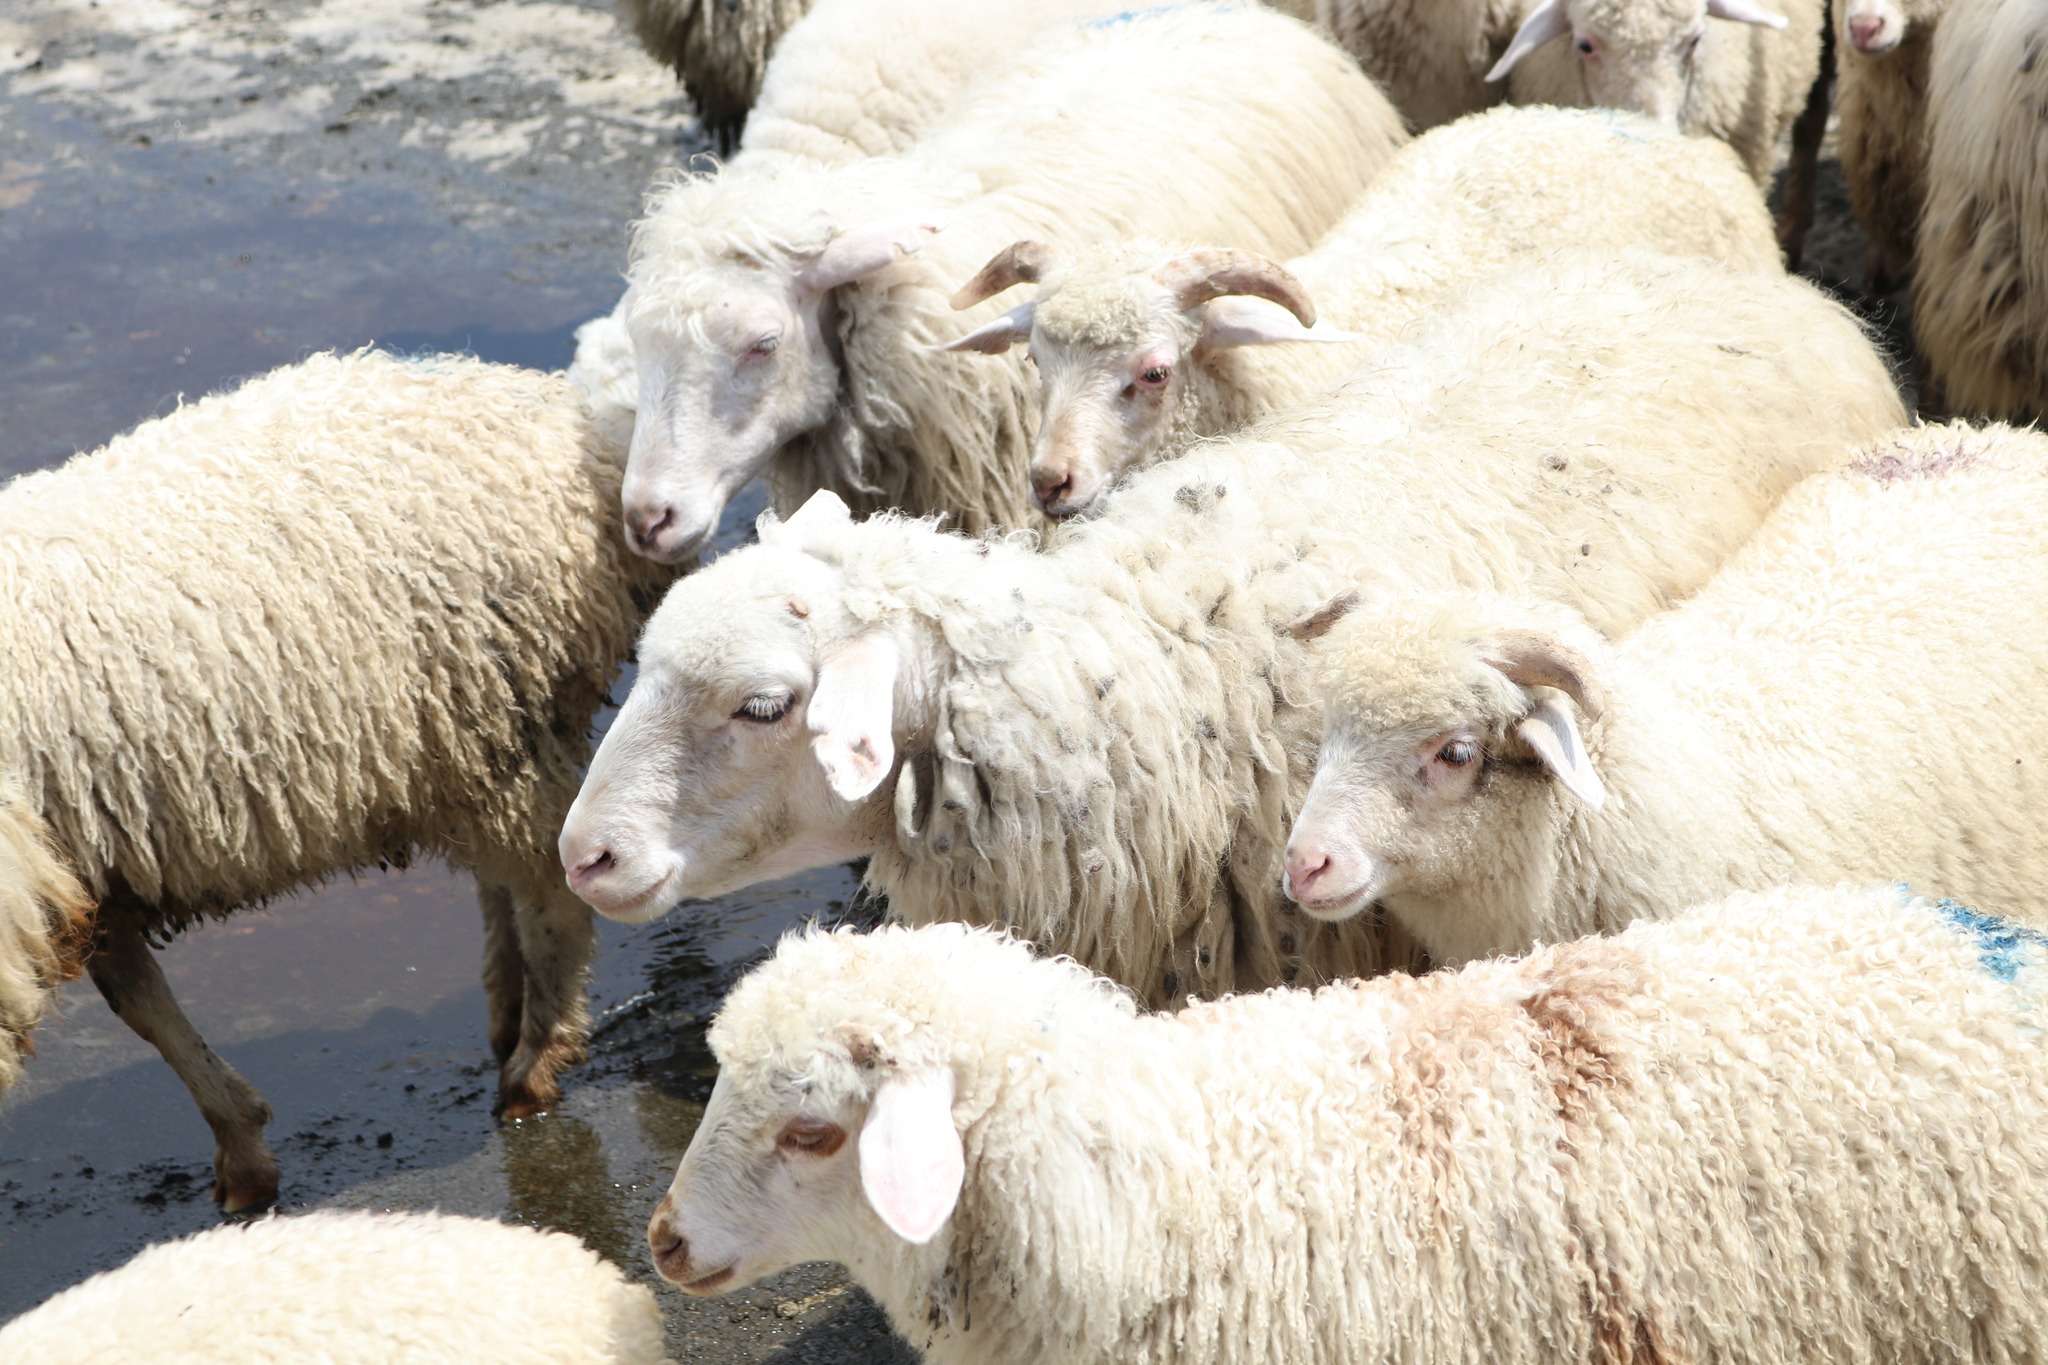 The export of sheep from Georgia to Azerbaijan entered an active phase from the end of May